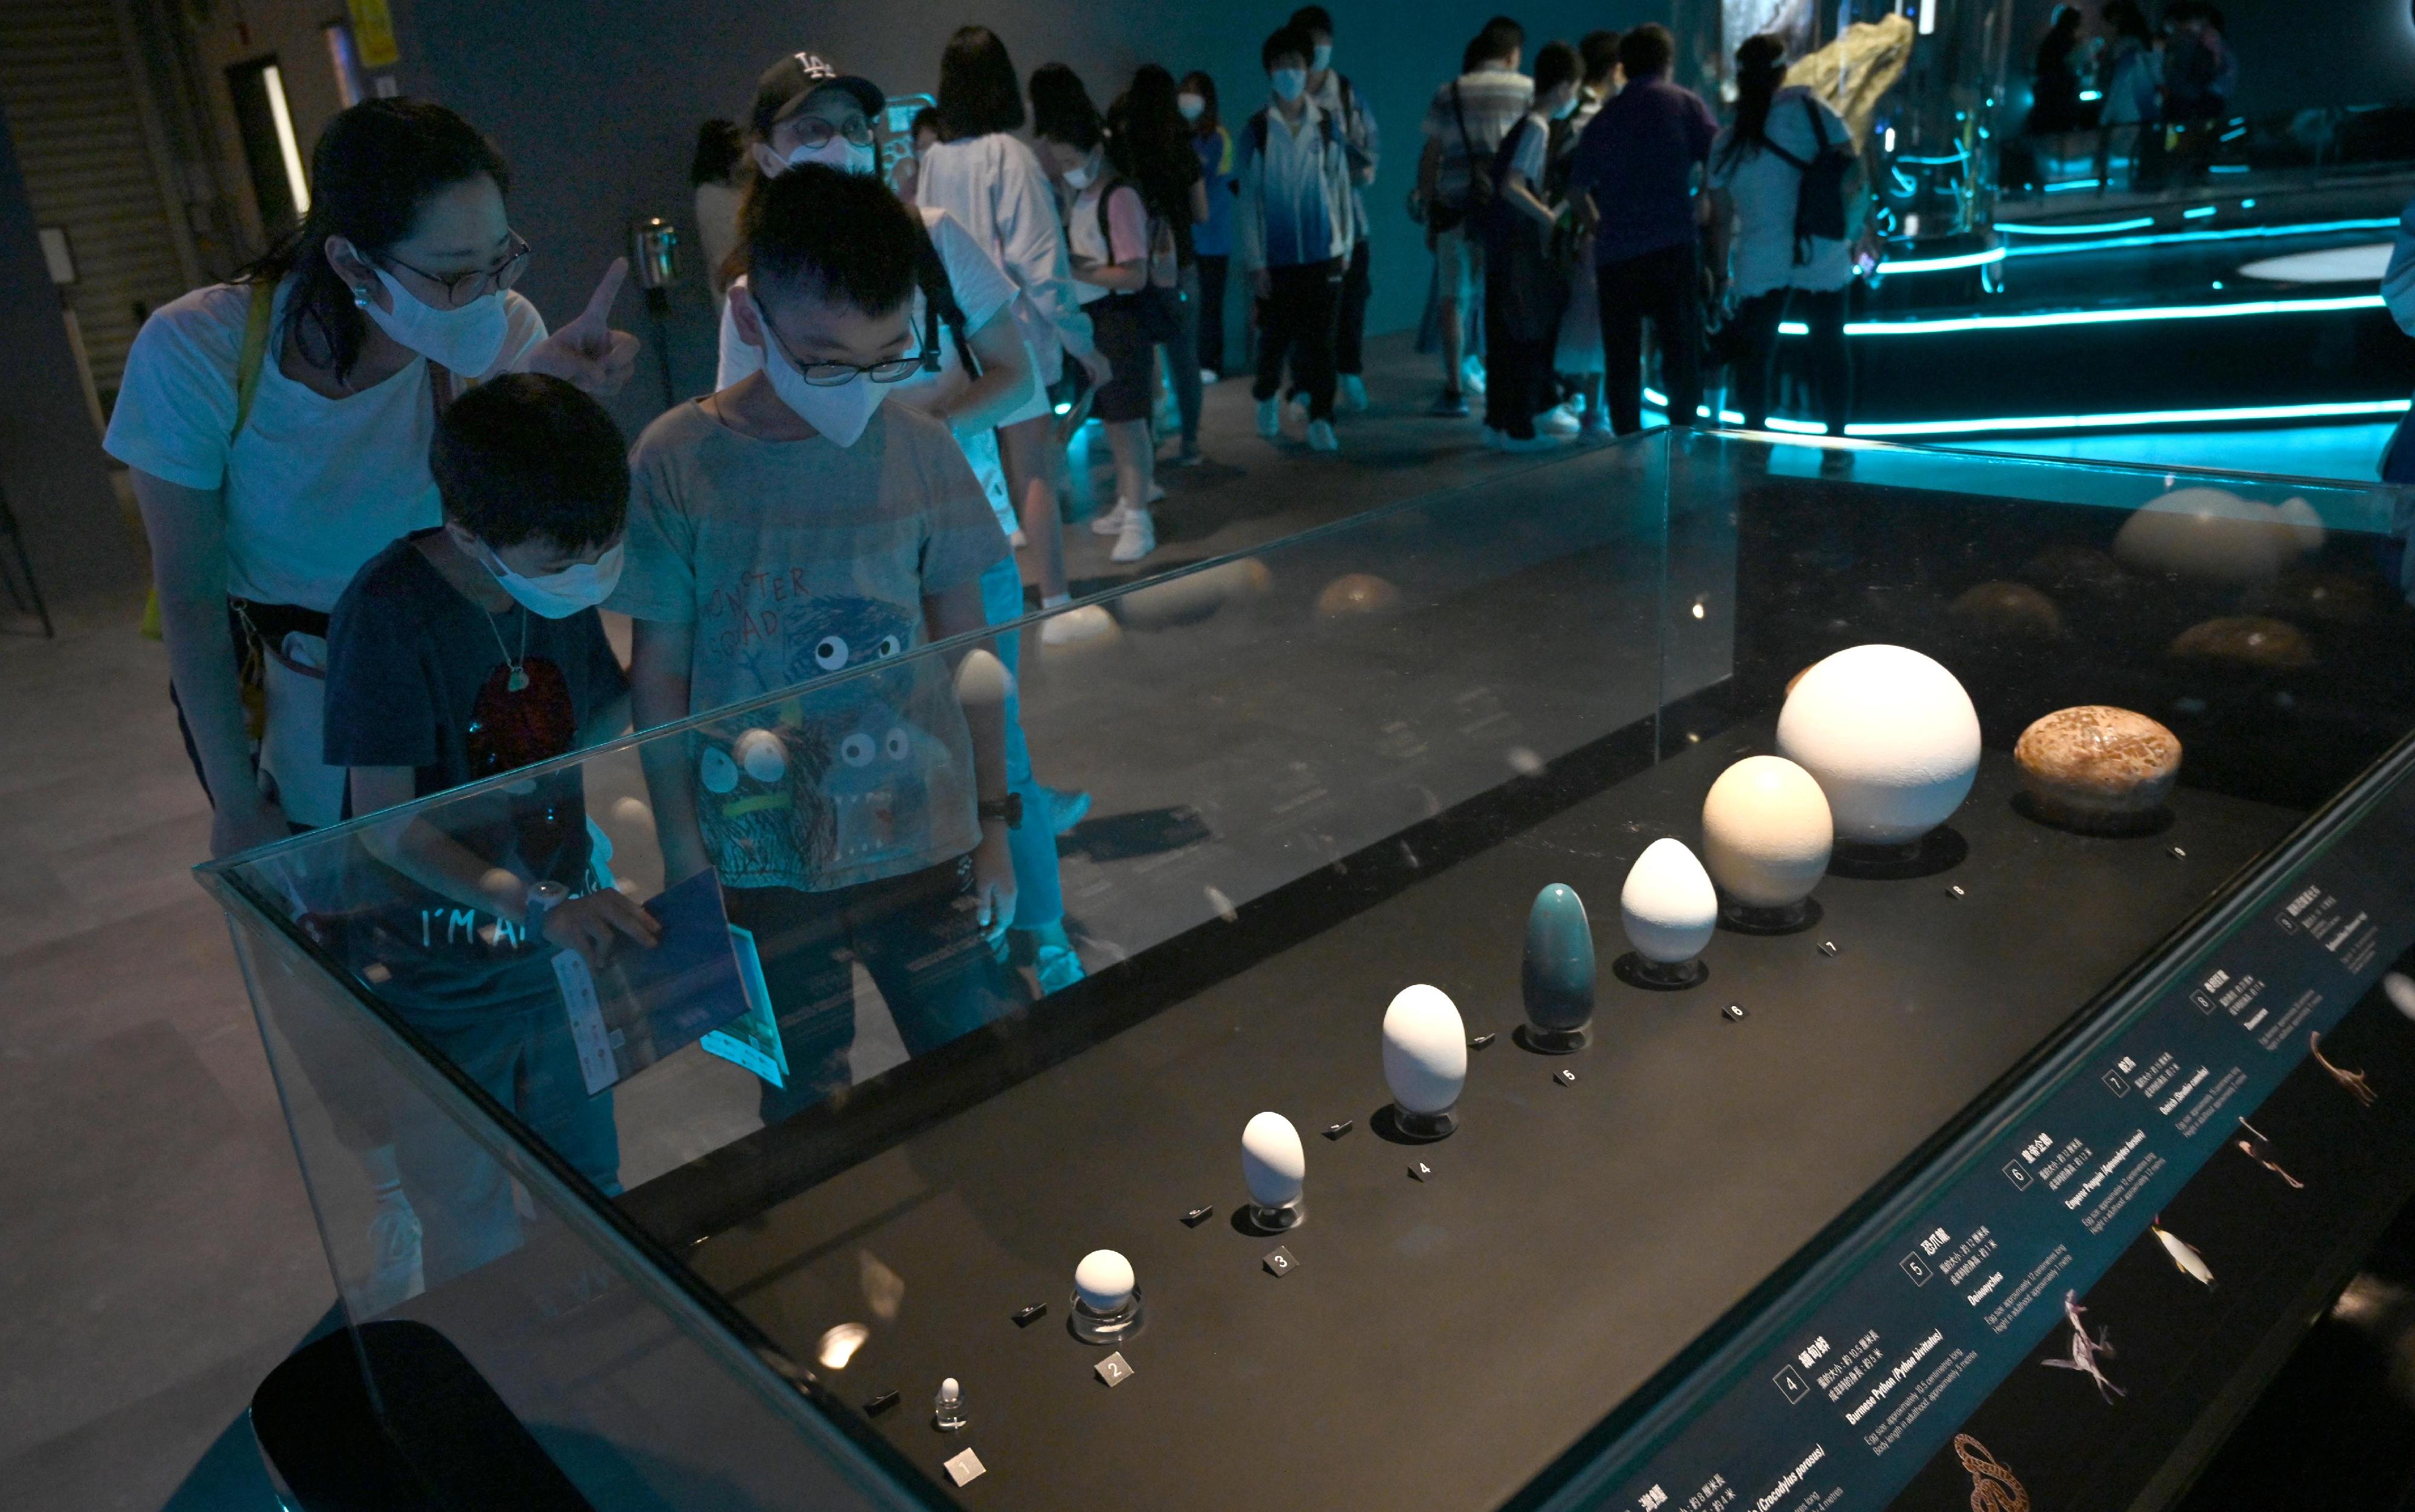 The free large-scale dinosaur exhibition "The Hong Kong Jockey Club Series: The Big Eight - Dinosaur Revelation" organised by the Hong Kong Science Museum has been receiving an overwhelming response from the public since its opening. The museum will extend the exhibition period to February 22, 2023. Picture shows visitors viewing and comparing different animal egg models and dinosaur egg fossils.